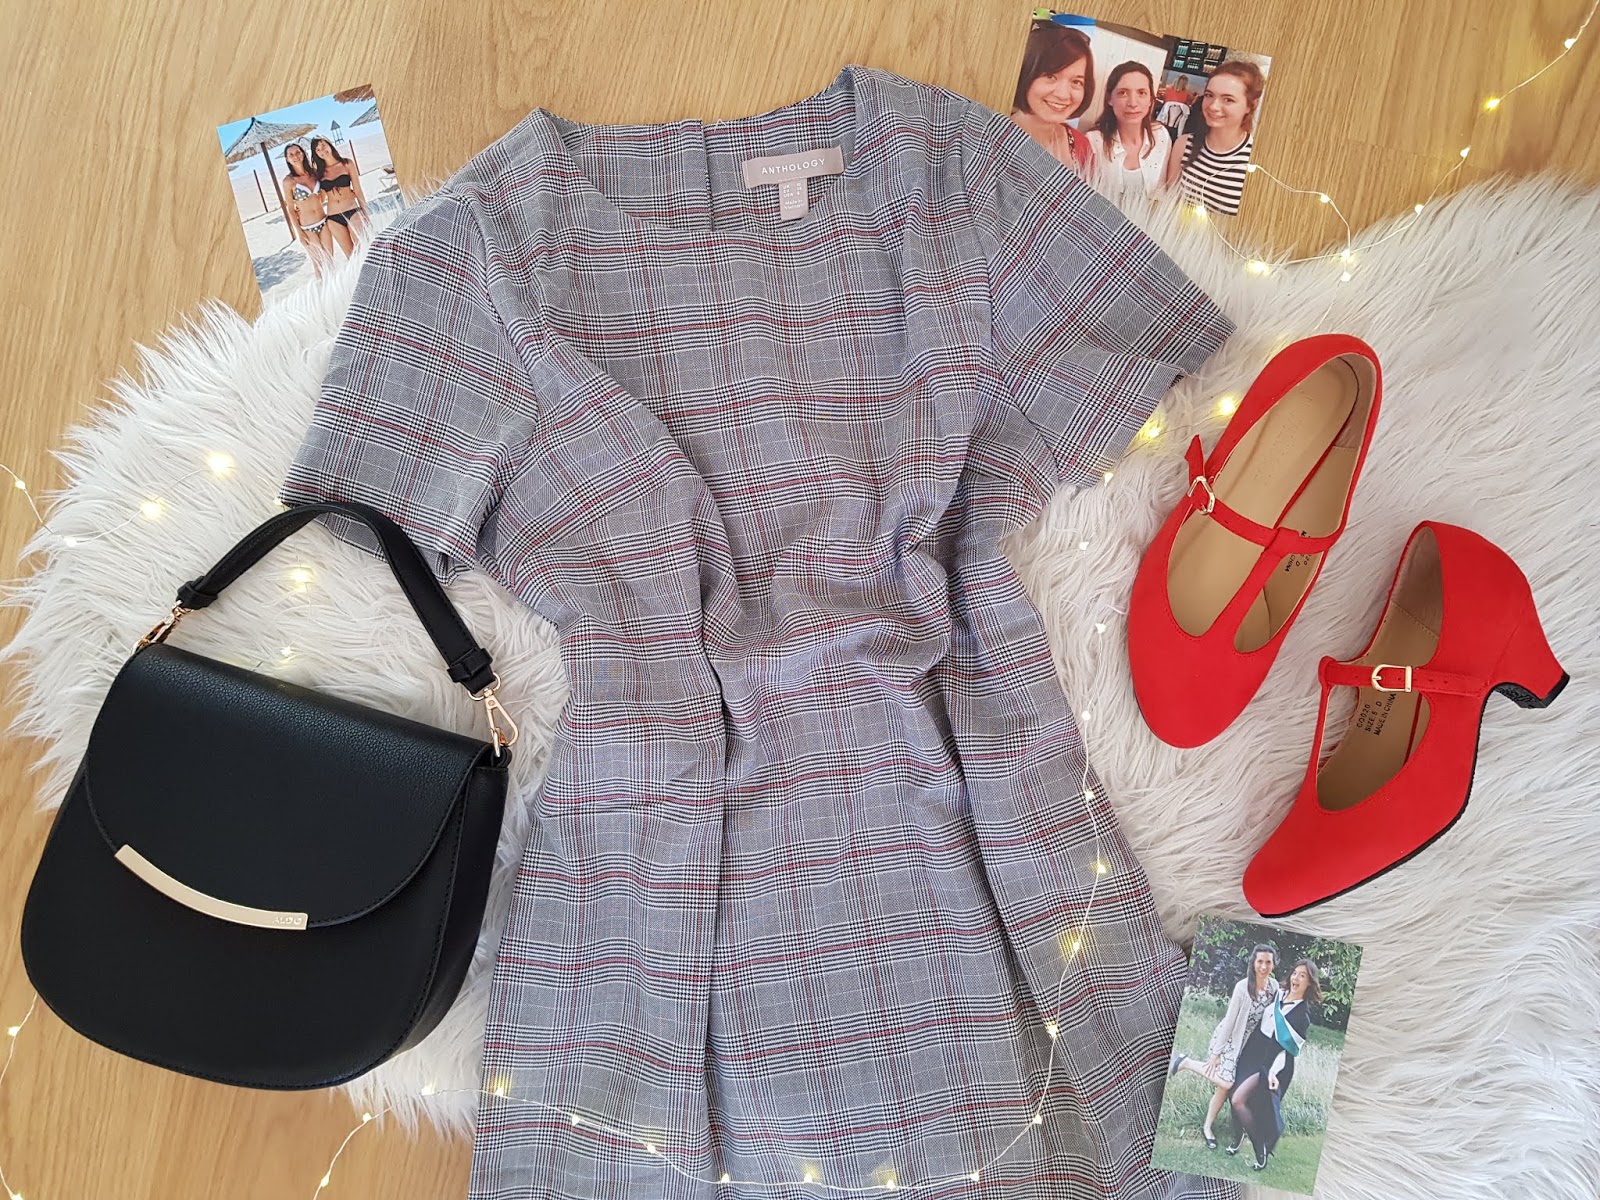 flatlay showing a dress, black leather handbag and red shoes, with photos of Abbey's Mum and fairy lights surrounding